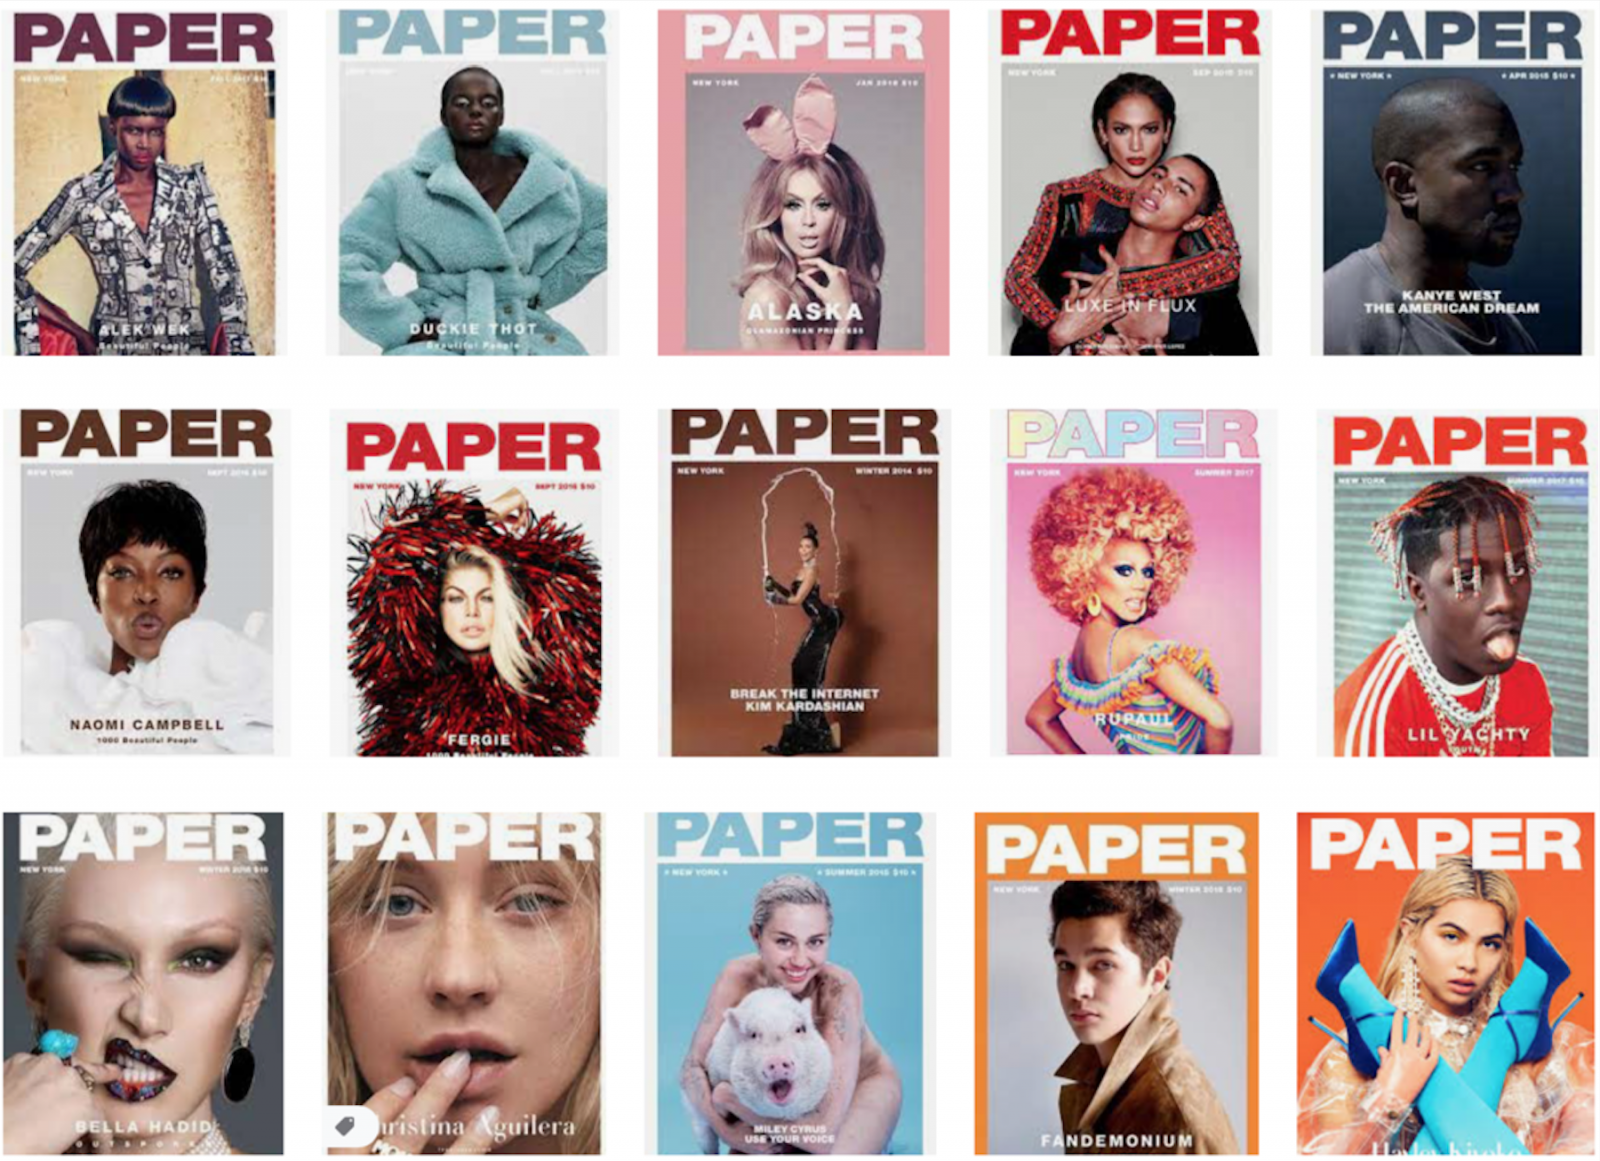 blod fiber Kvadrant Paper Magazine Files Copyright, RICO Case Over Alleged Scheme to Hold its  Instagram Account Hostage for $4.6 Million - The Fashion Law